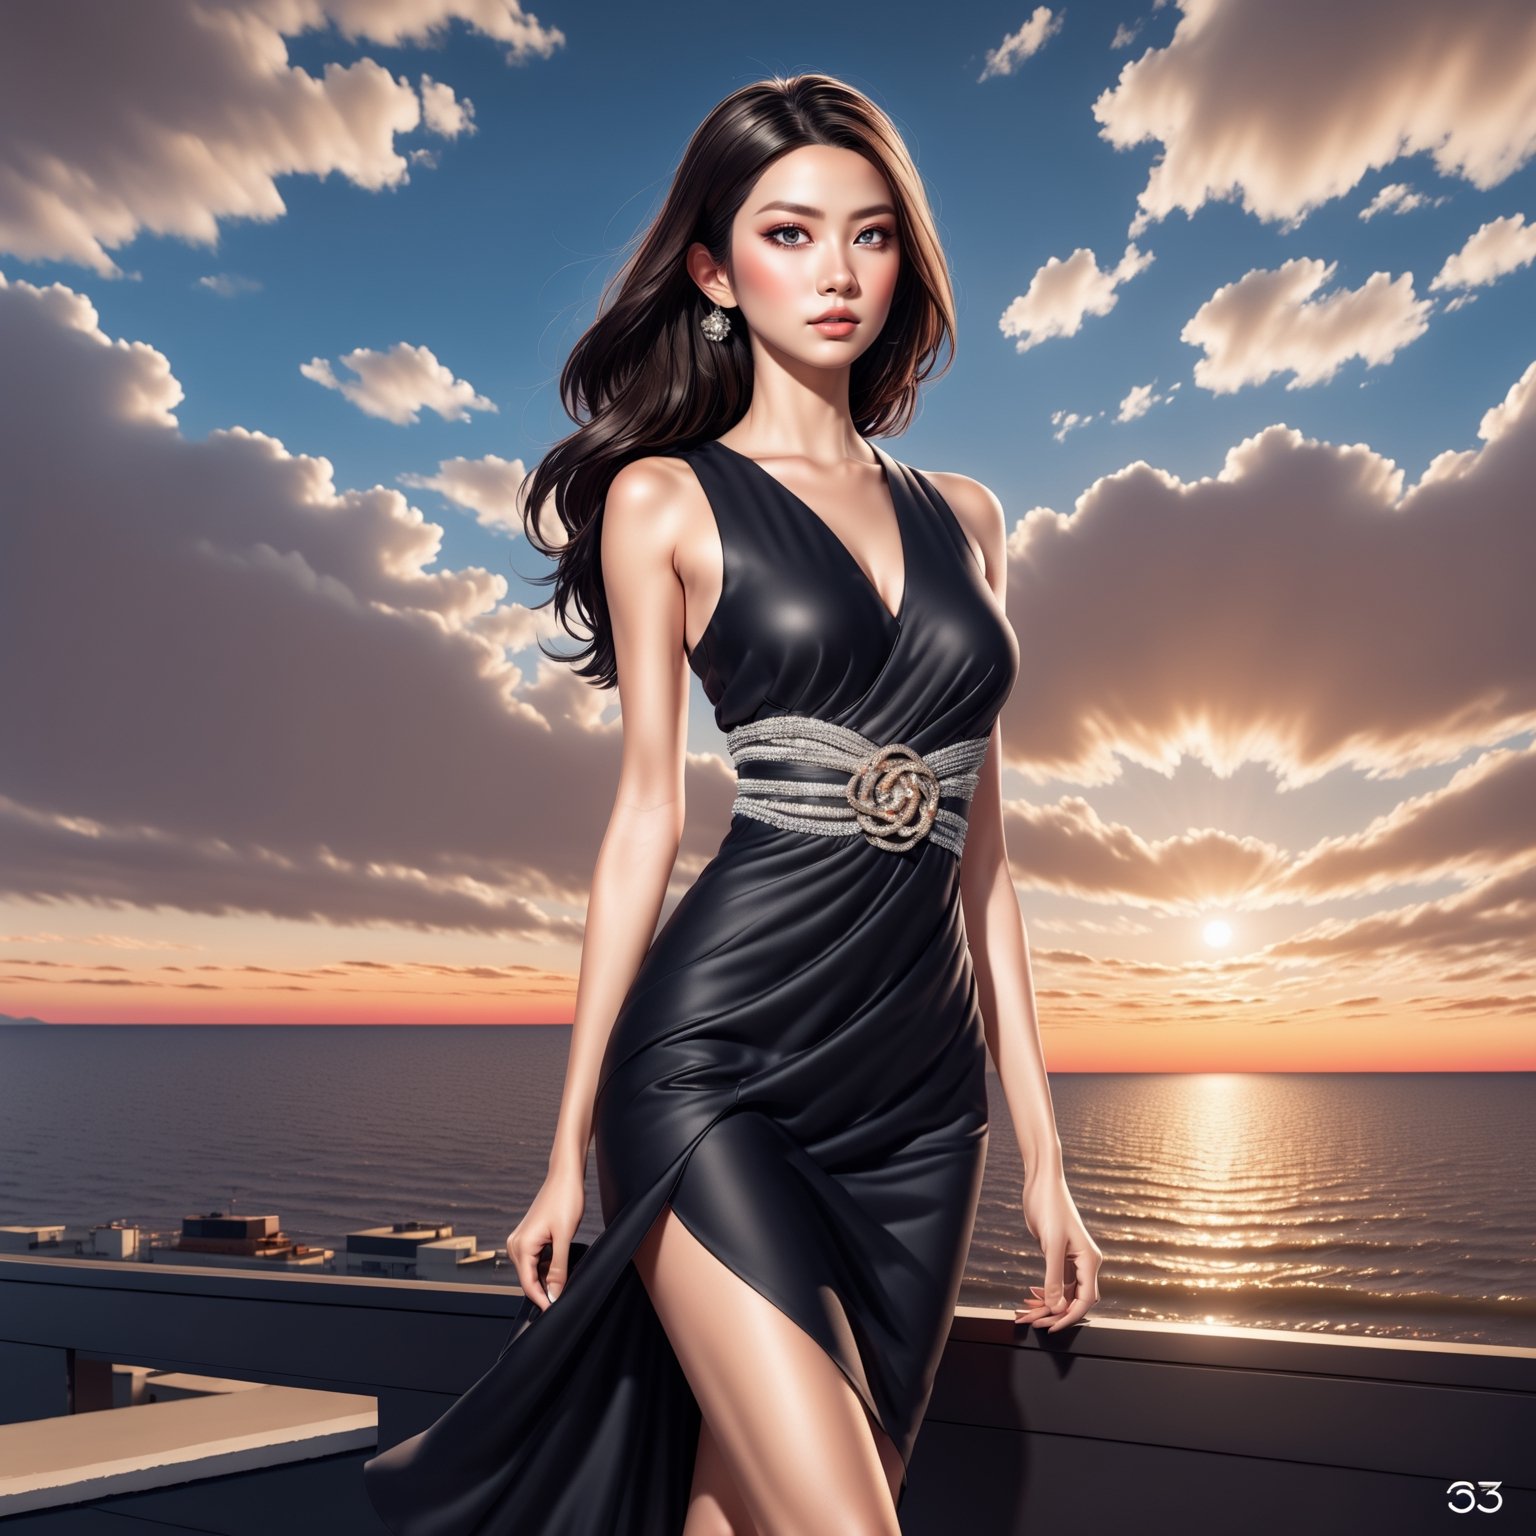 ((Full-Body)), 1female hot model, black hair, wearing ((haute couture de Chanel)), full detail, perfect viewpoint, highly detailed, wide-angle lens, hyper realistic, with dramatic sky, polarizing filter, natural lighting, vivid colors, sunset,, everything in sharp focus,manga style,Extremely Realistic,LinkGirl